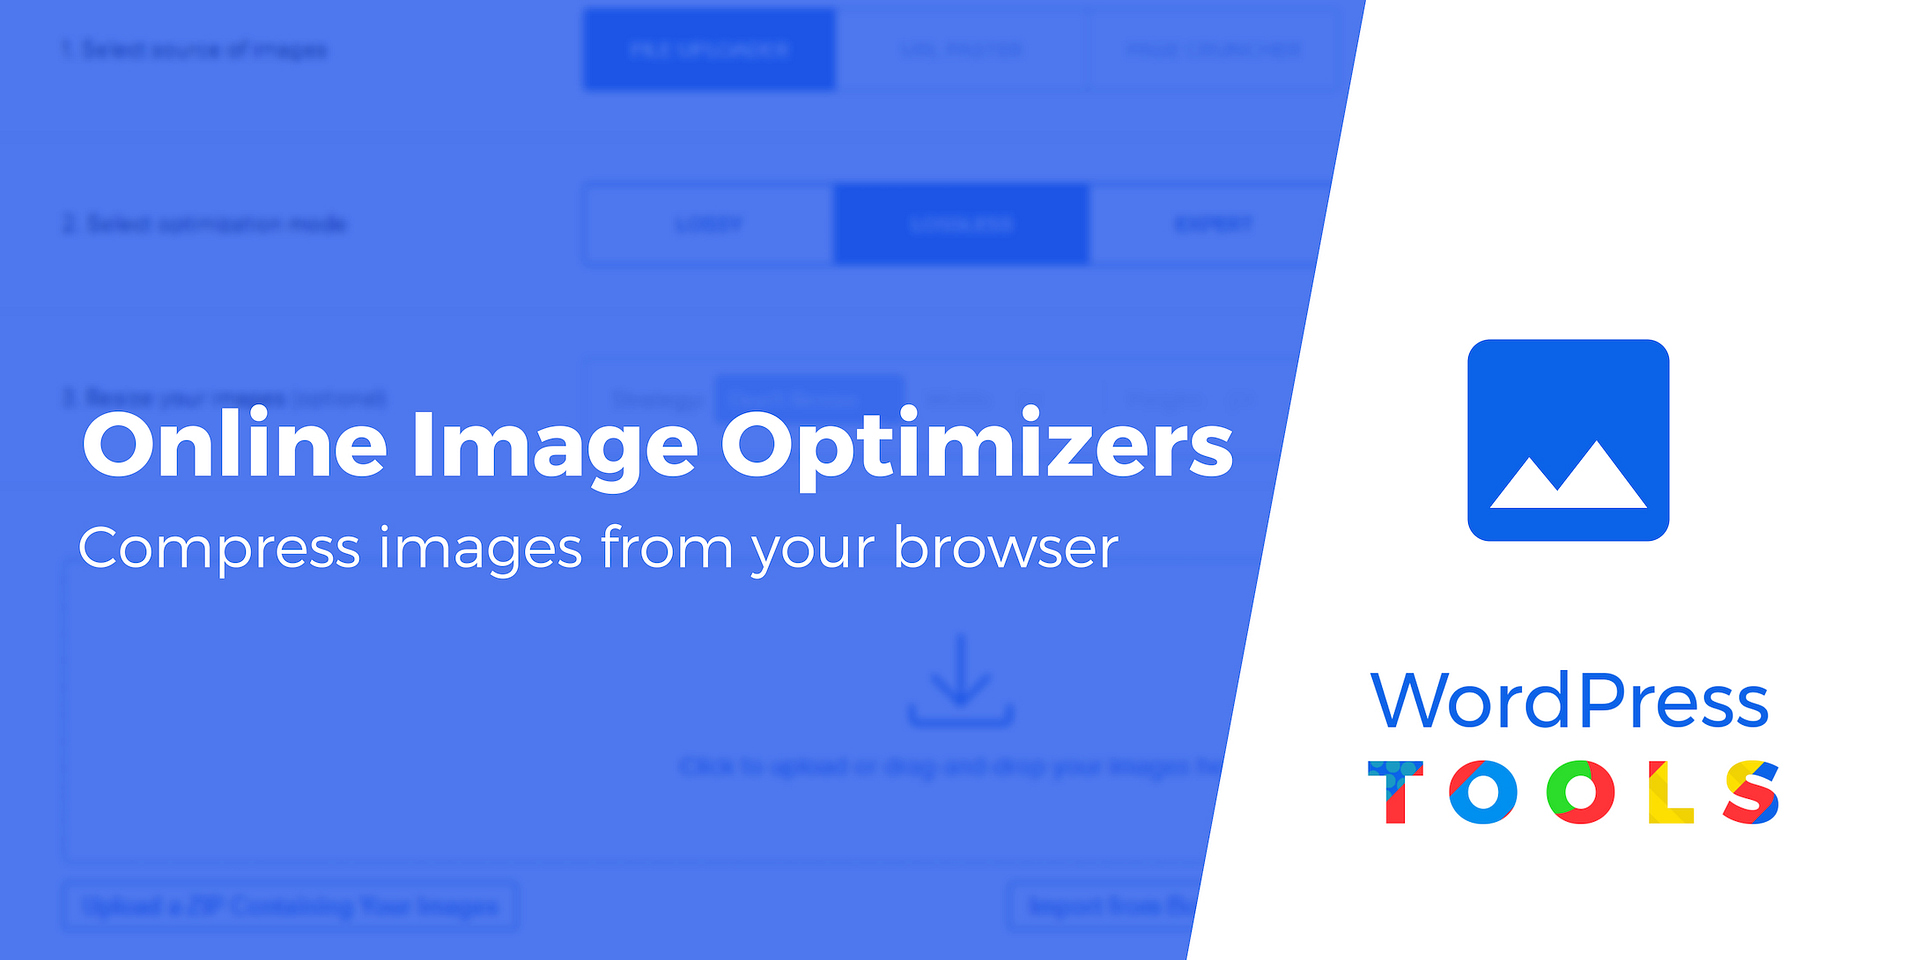 7 Best Online Image Optimizer Tools Compared Real Test Data